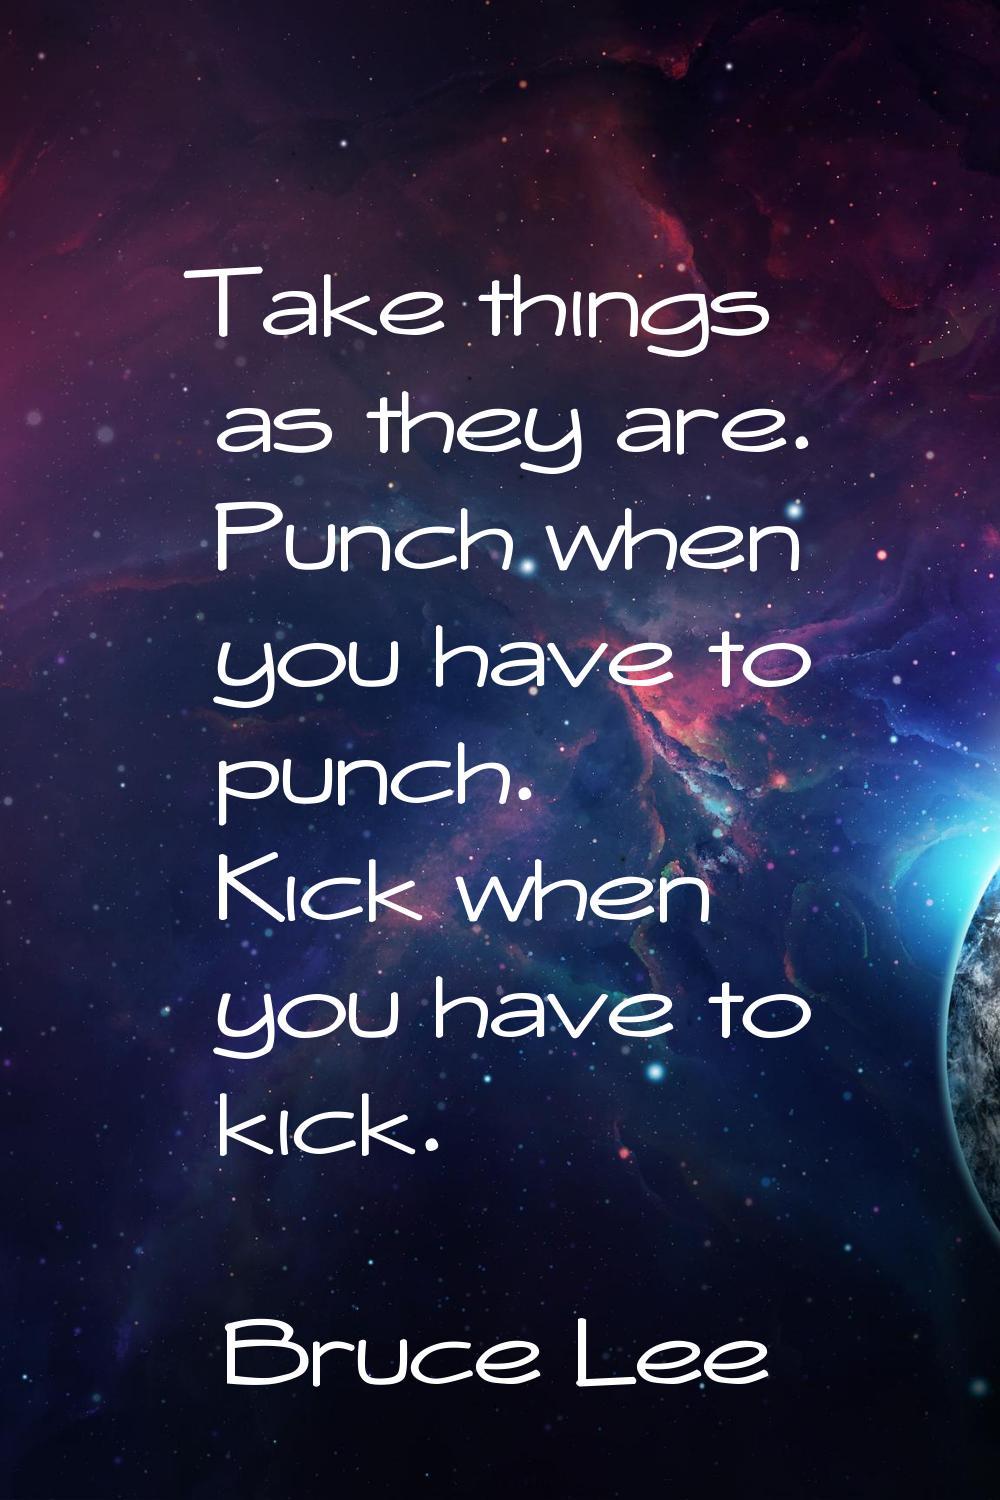 Take things as they are. Punch when you have to punch. Kick when you have to kick.